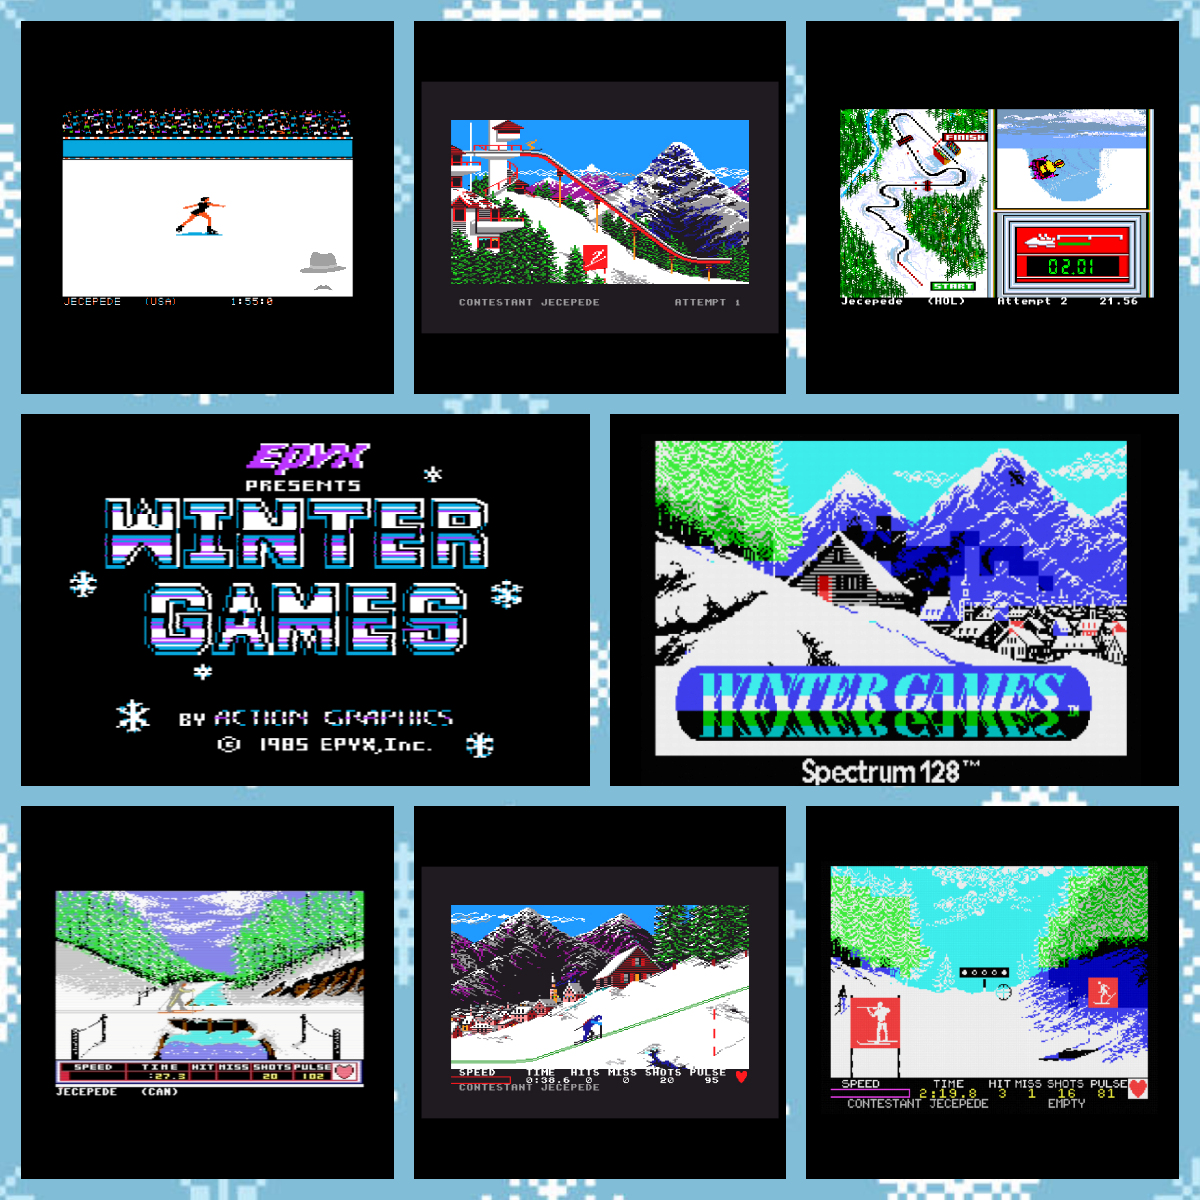 I know, I know. The weather is hot, but I'm playing #WinterGames on #Commodore64, #Amiga, #ZxSpectrum and #AmstradCPC... #Retro #RetroComputing #RetroComputer #RetroGaming #RetroGame #Commodore #C64 #C64c #Epyx #UsGold